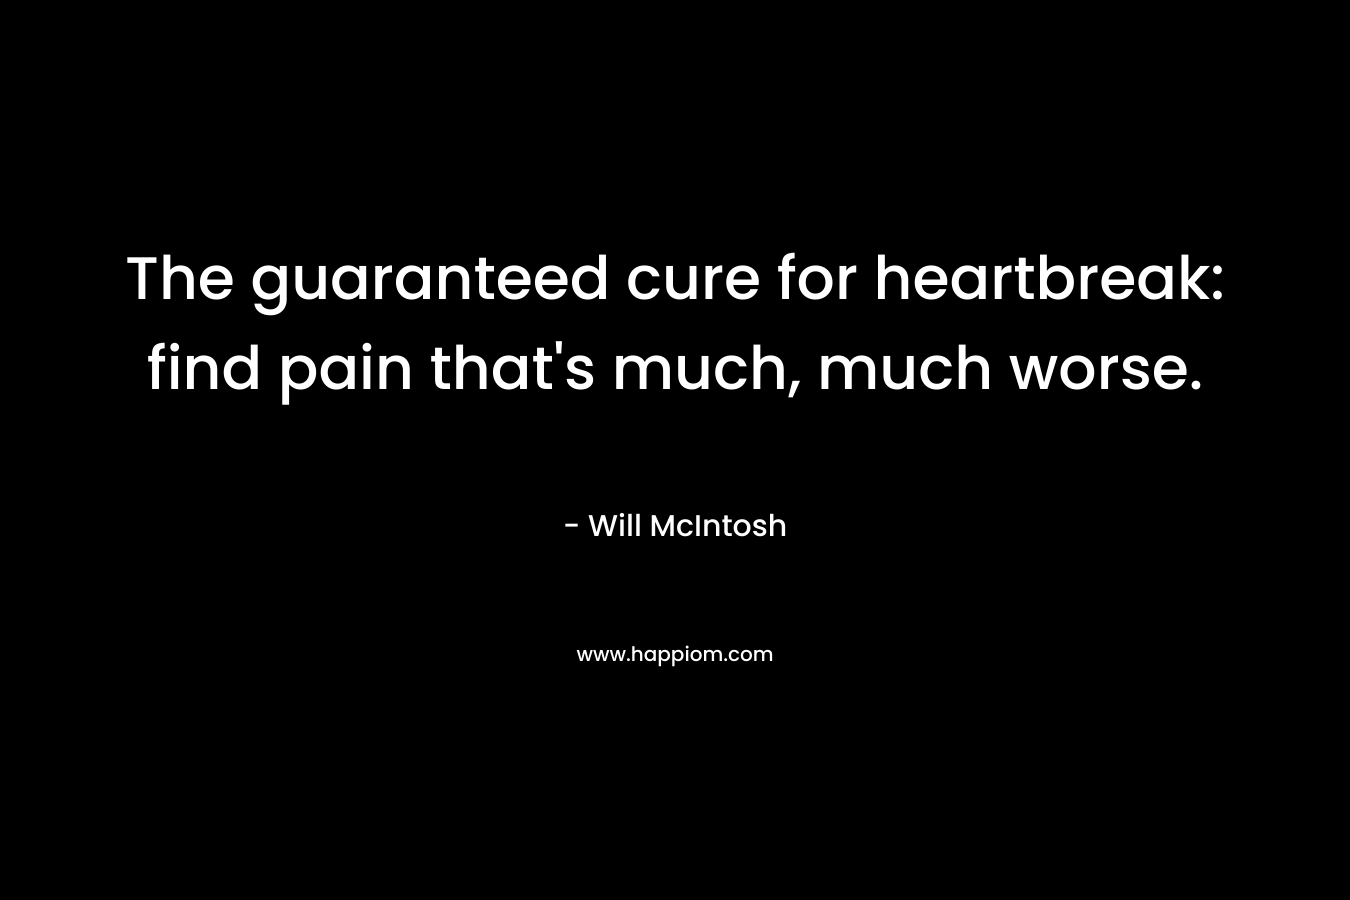 The guaranteed cure for heartbreak: find pain that’s much, much worse. – Will McIntosh